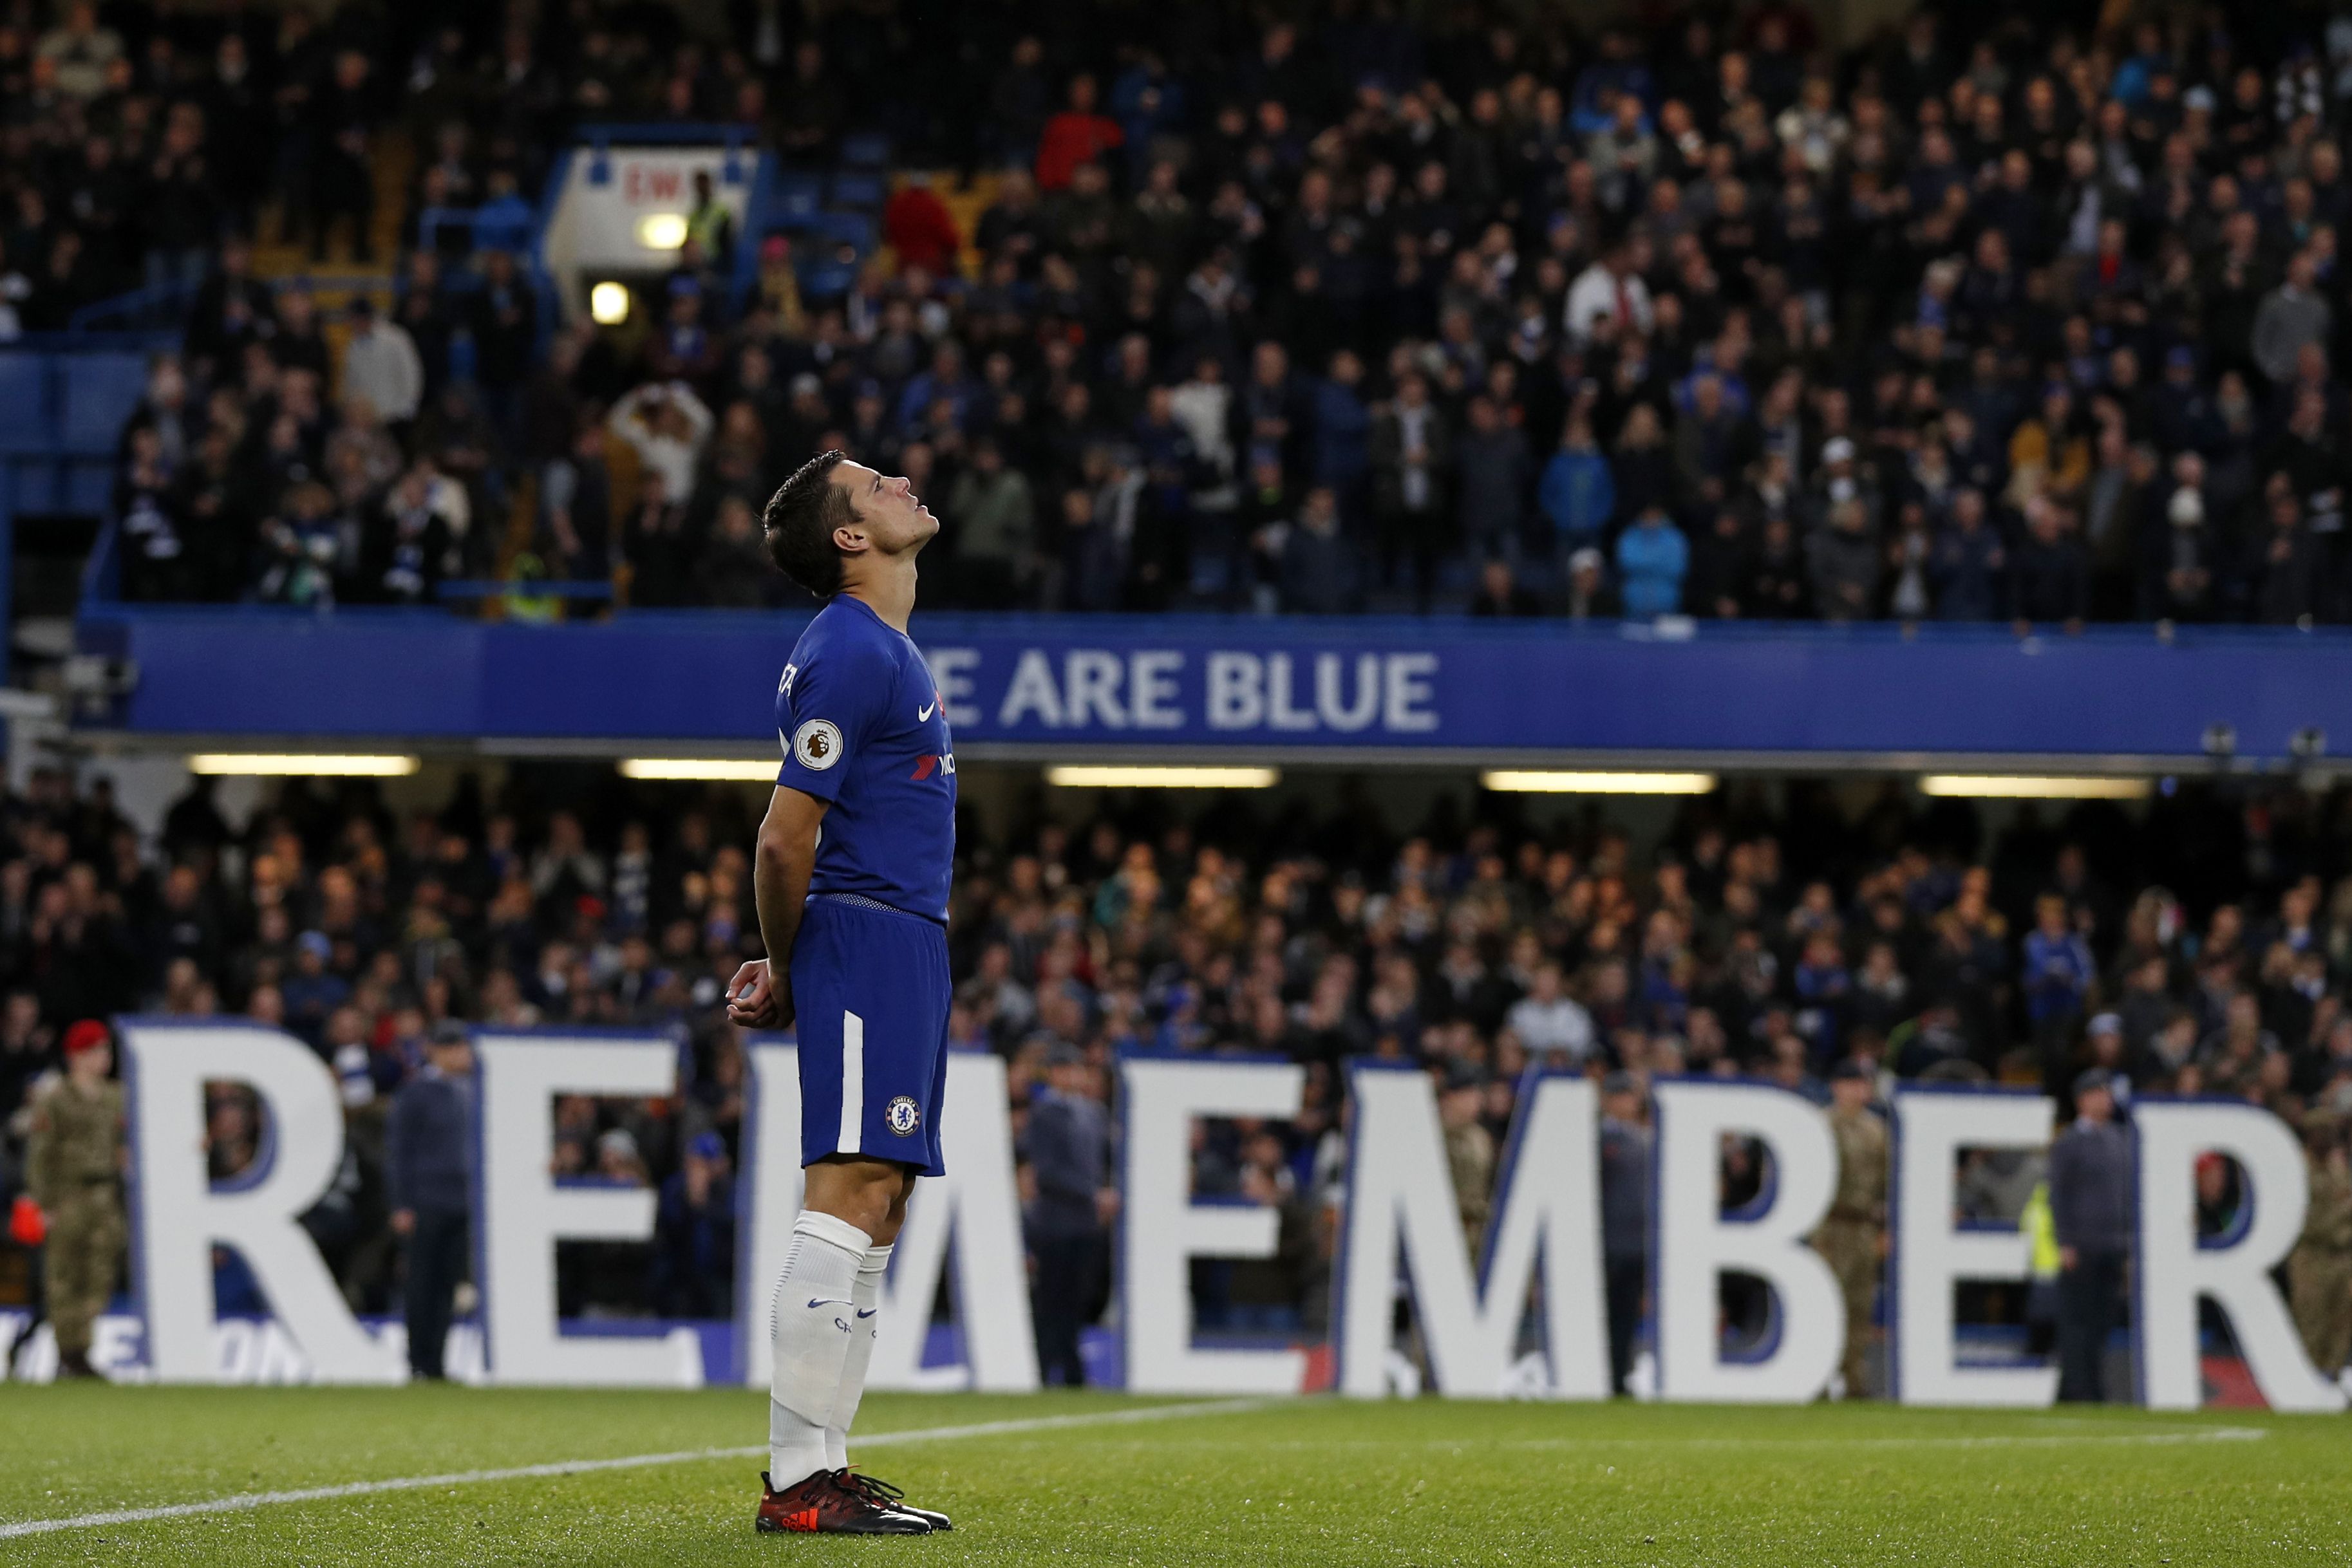 Chelsea's Spanish defender Cesar Azpilicueta reacts ahead of the English Premier League football match between Chelsea and Manchester United at Stamford Bridge in London on November 5, 2017. / AFP PHOTO / Adrian DENNIS / RESTRICTED TO EDITORIAL USE. No use with unauthorized audio, video, data, fixture lists, club/league logos or 'live' services. Online in-match use limited to 75 images, no video emulation. No use in betting, games or single club/league/player publications.  /         (Photo credit should read ADRIAN DENNIS/AFP/Getty Images)